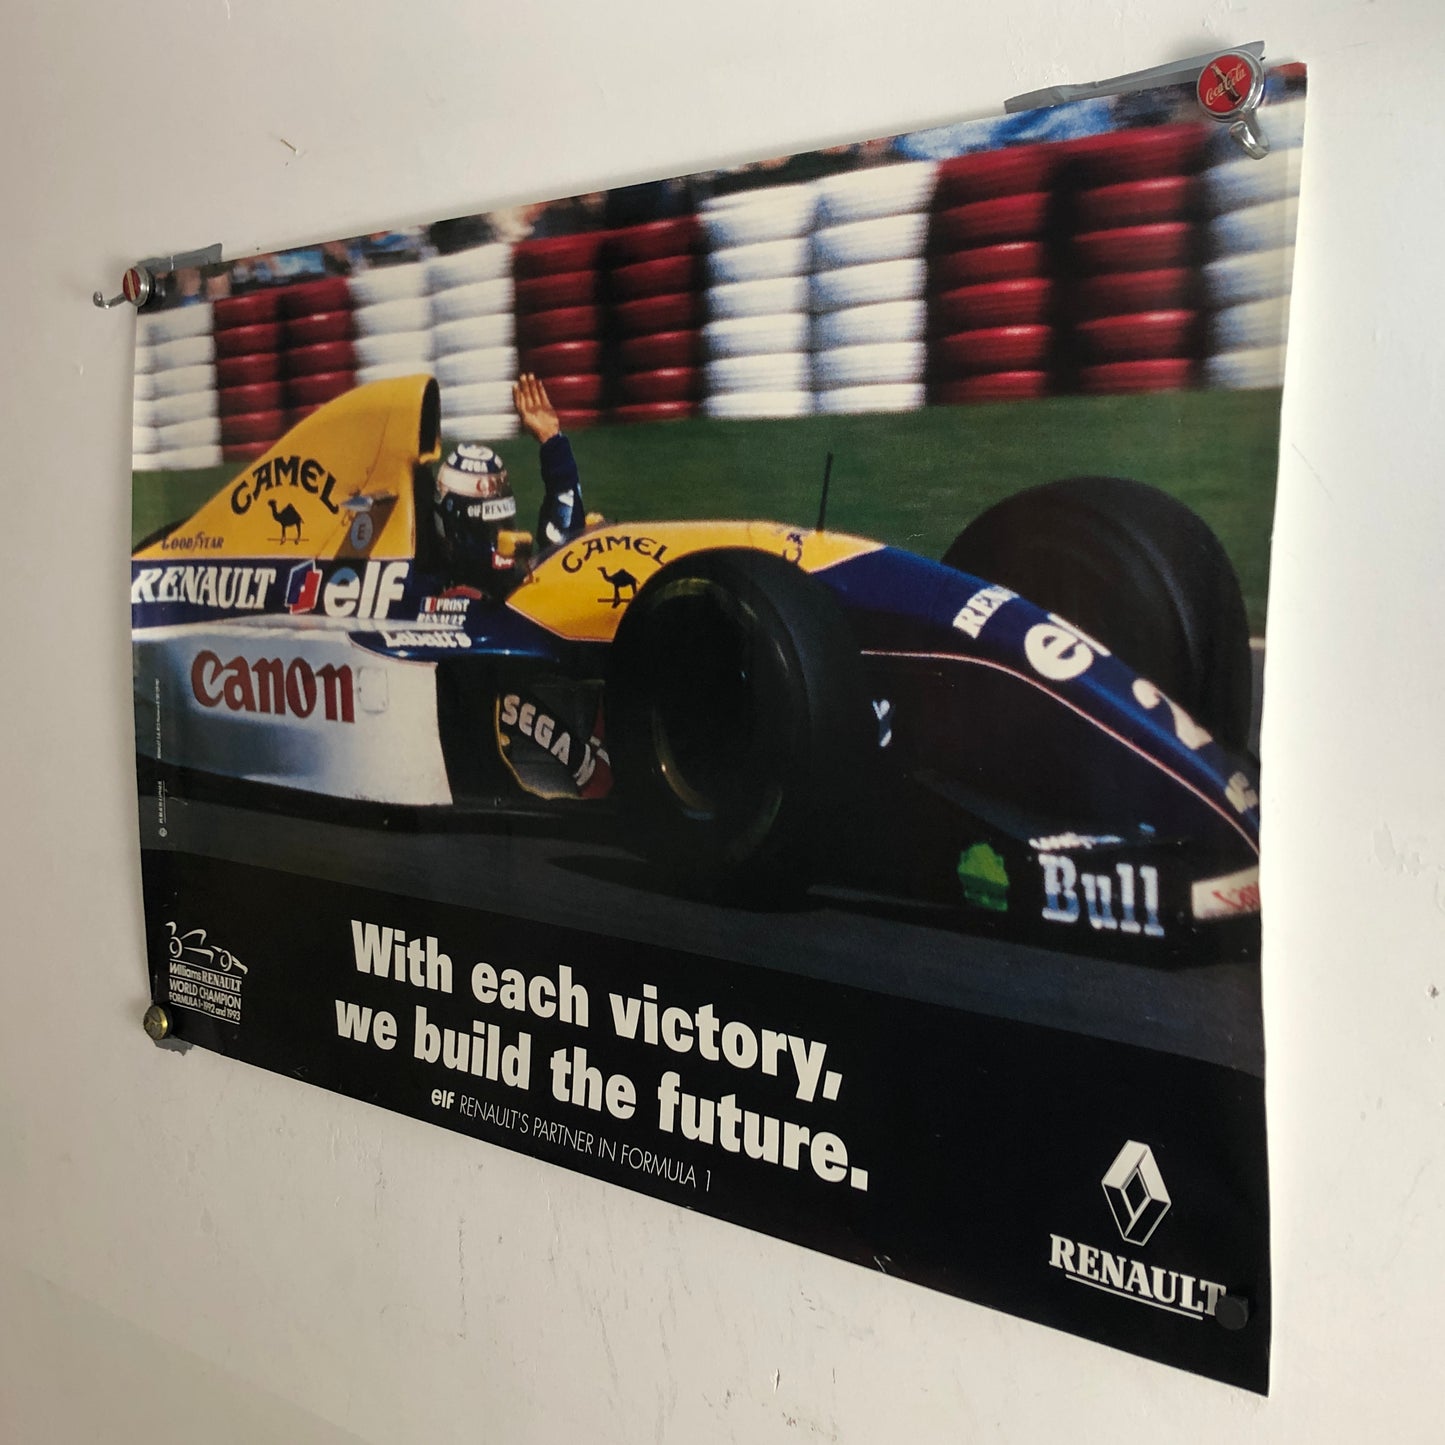 Renault Williams F1 Poster With Each Victory We Built the Future World Champion 1992 1993 Alain Prost